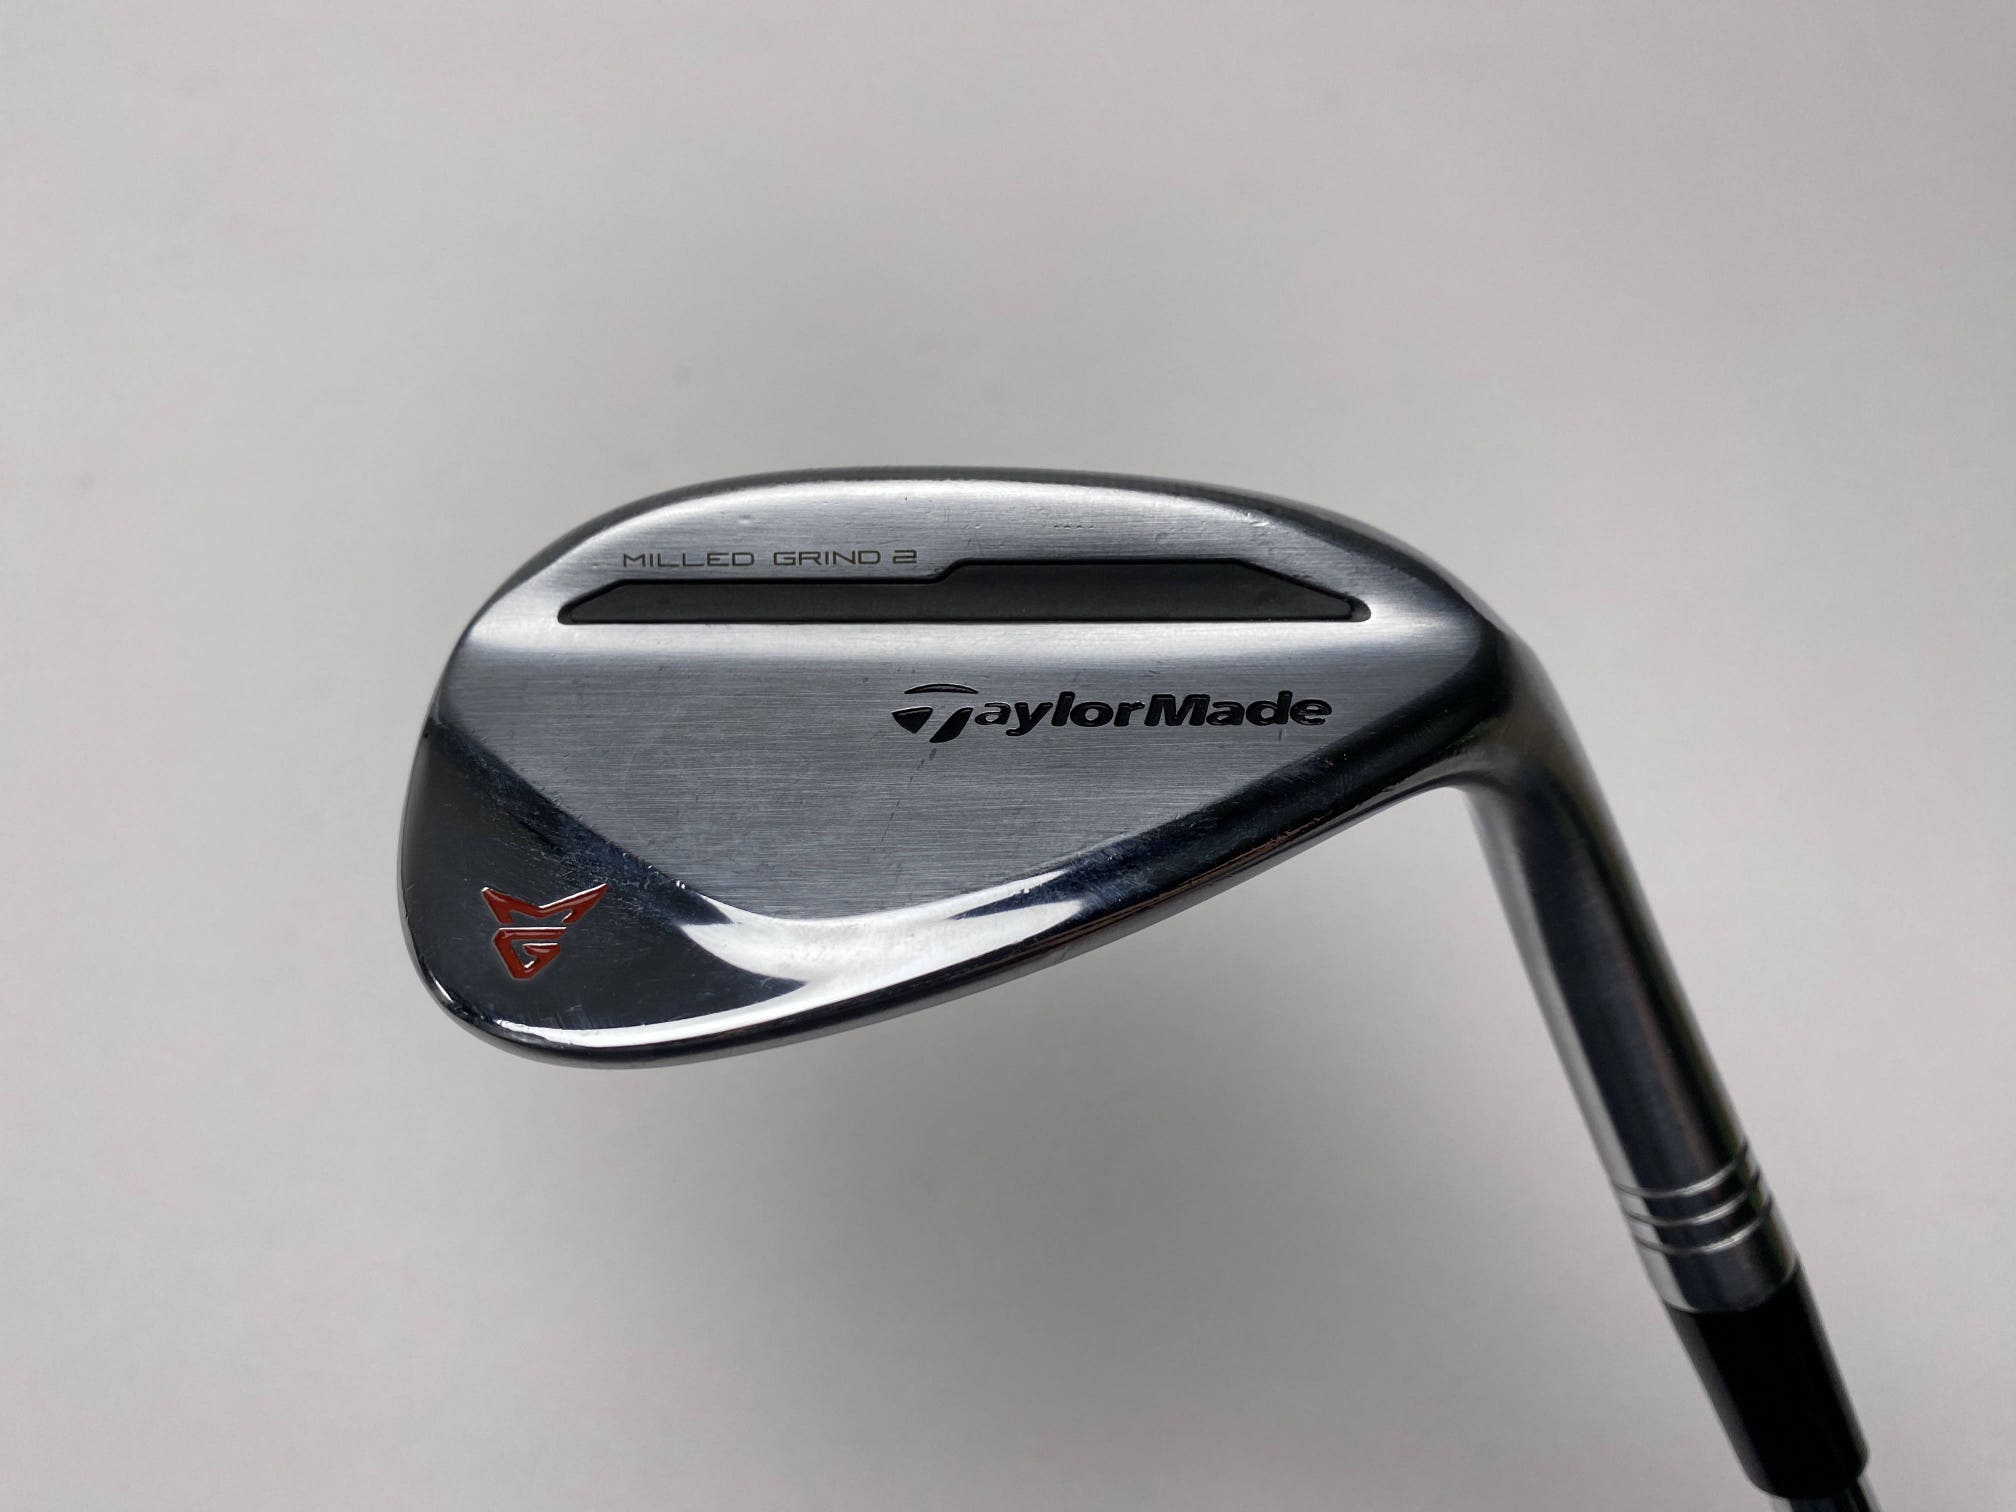 Taylormade Milled Grind 2 Chrome Sand Wedge SW 54* 11 Bounce DG S200 Stiff RH